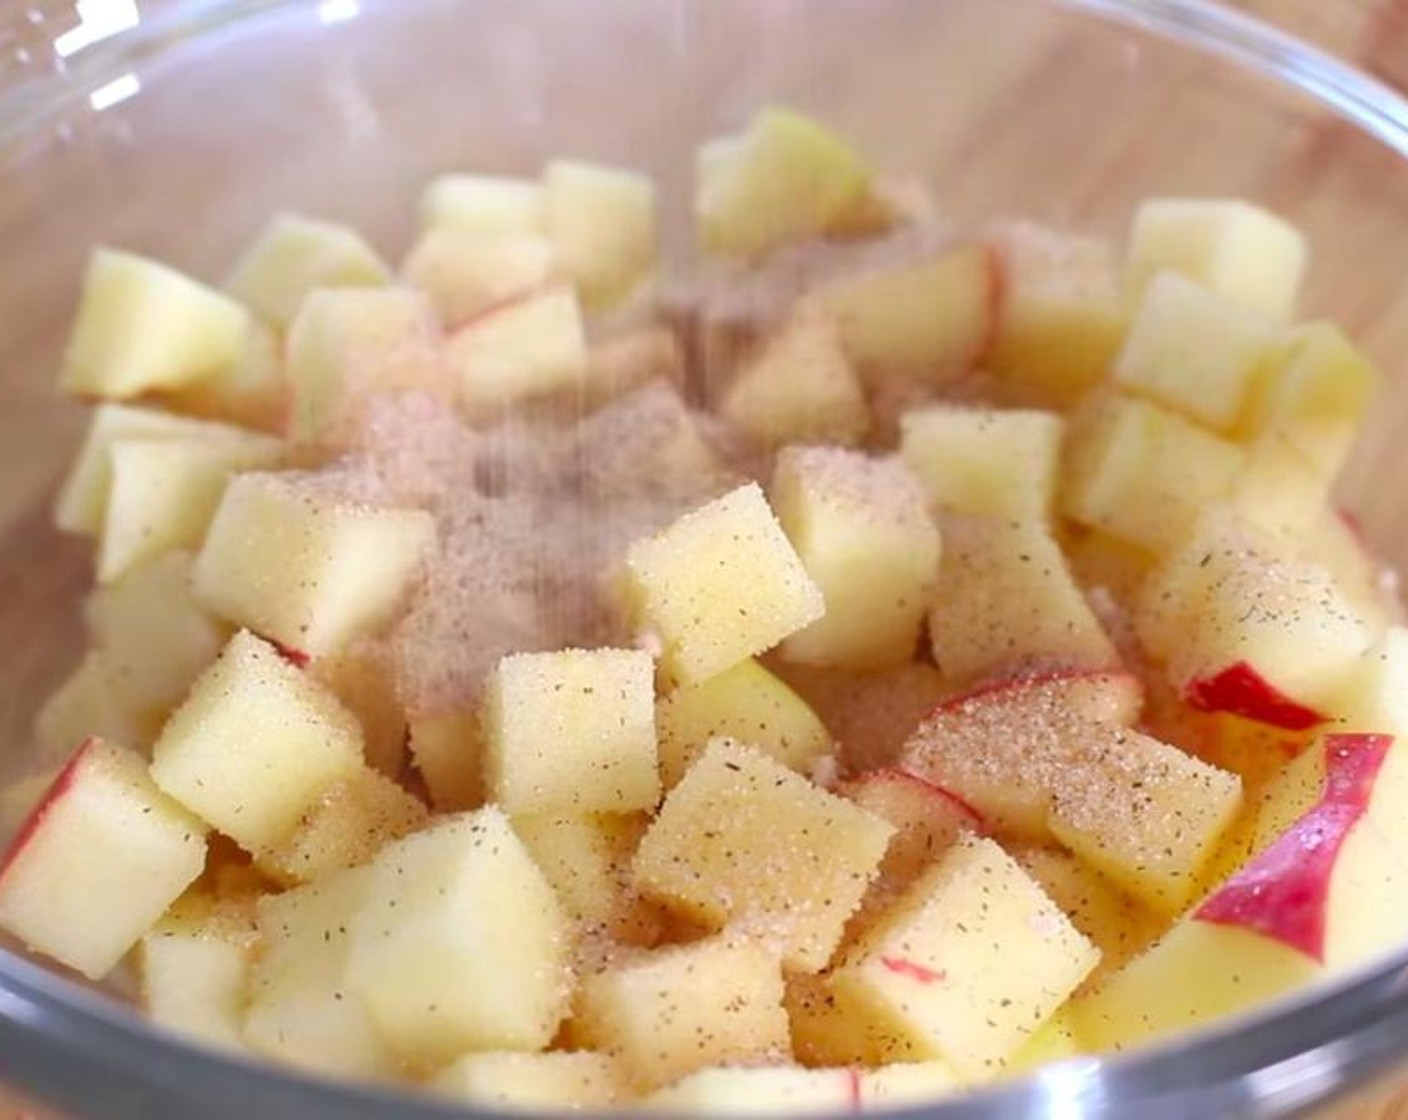 step 2 In a small bowl, mix together the Granulated Sugar (1/2 cup) and Ground Cinnamon (1 tsp). Coat the Apples (3) with the sugar mixture.